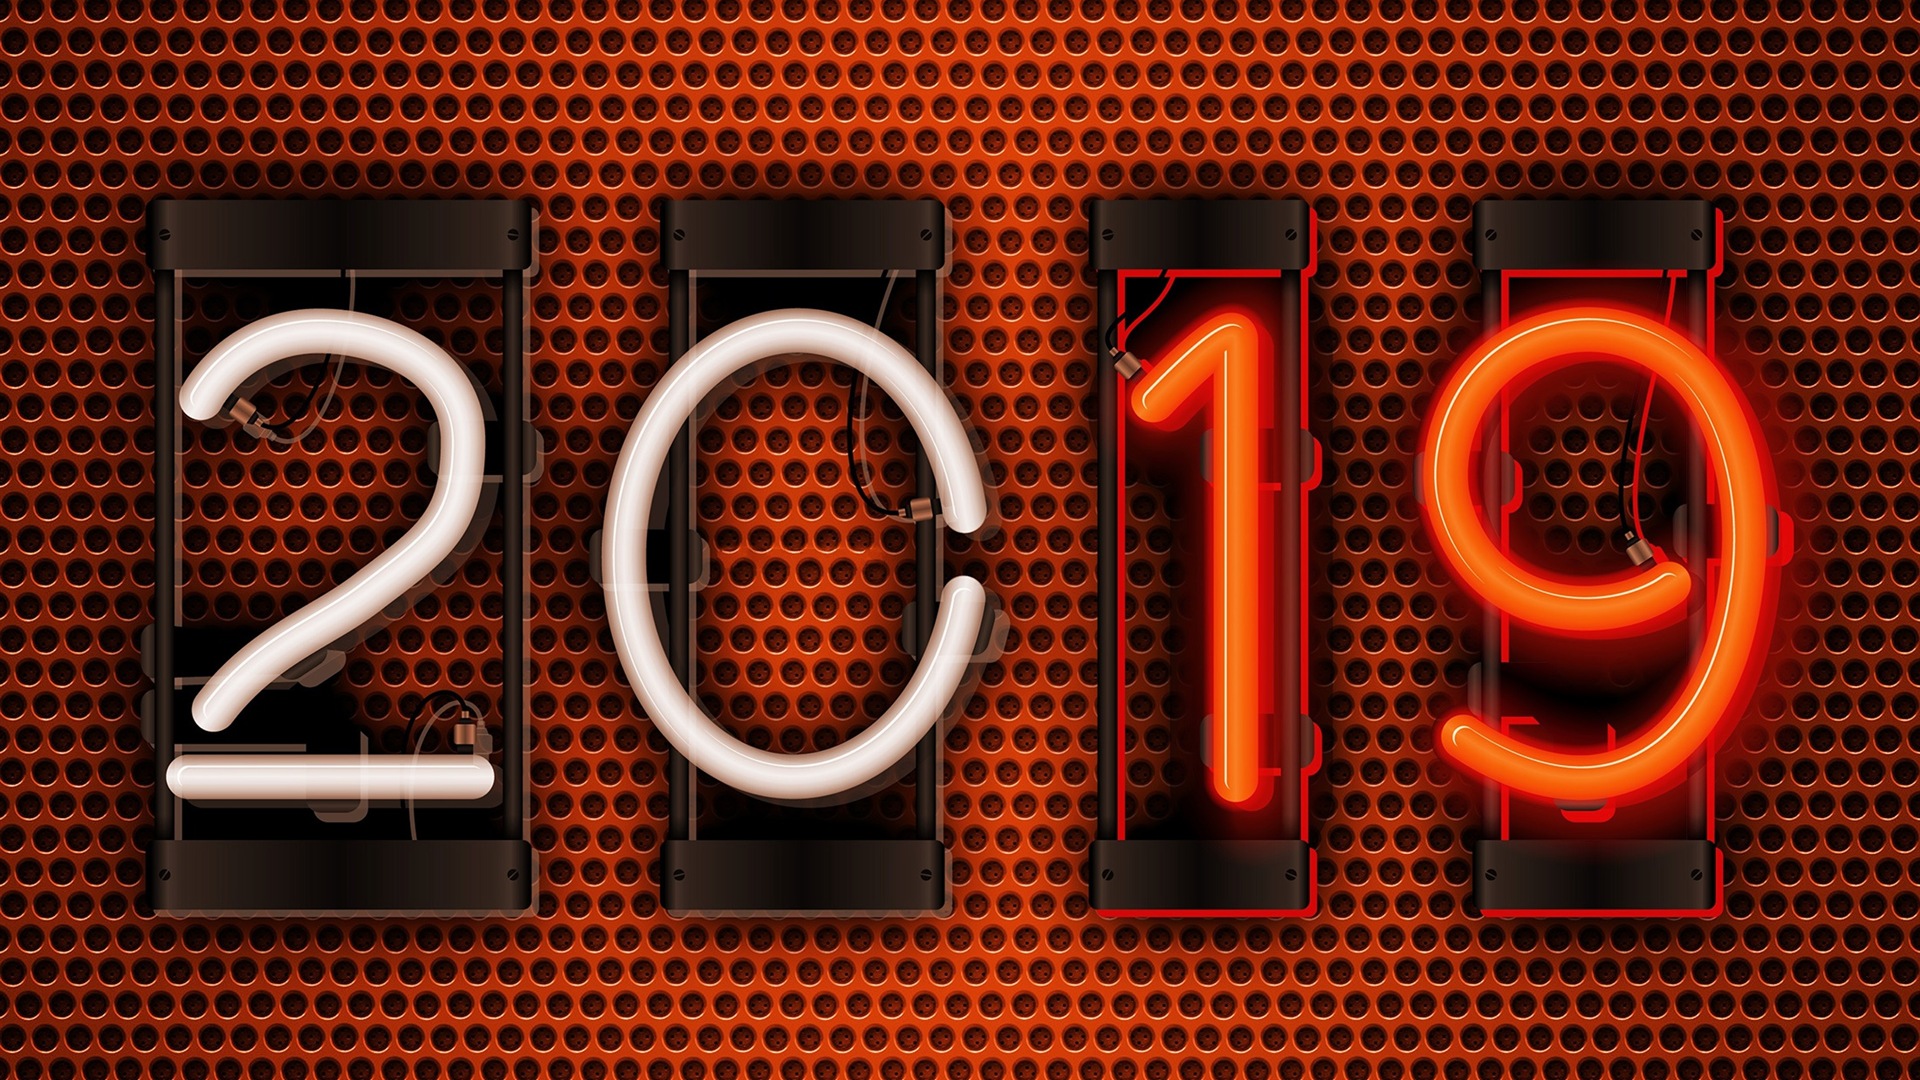 Happy New Year 2019 HD wallpapers #3 - 1920x1080